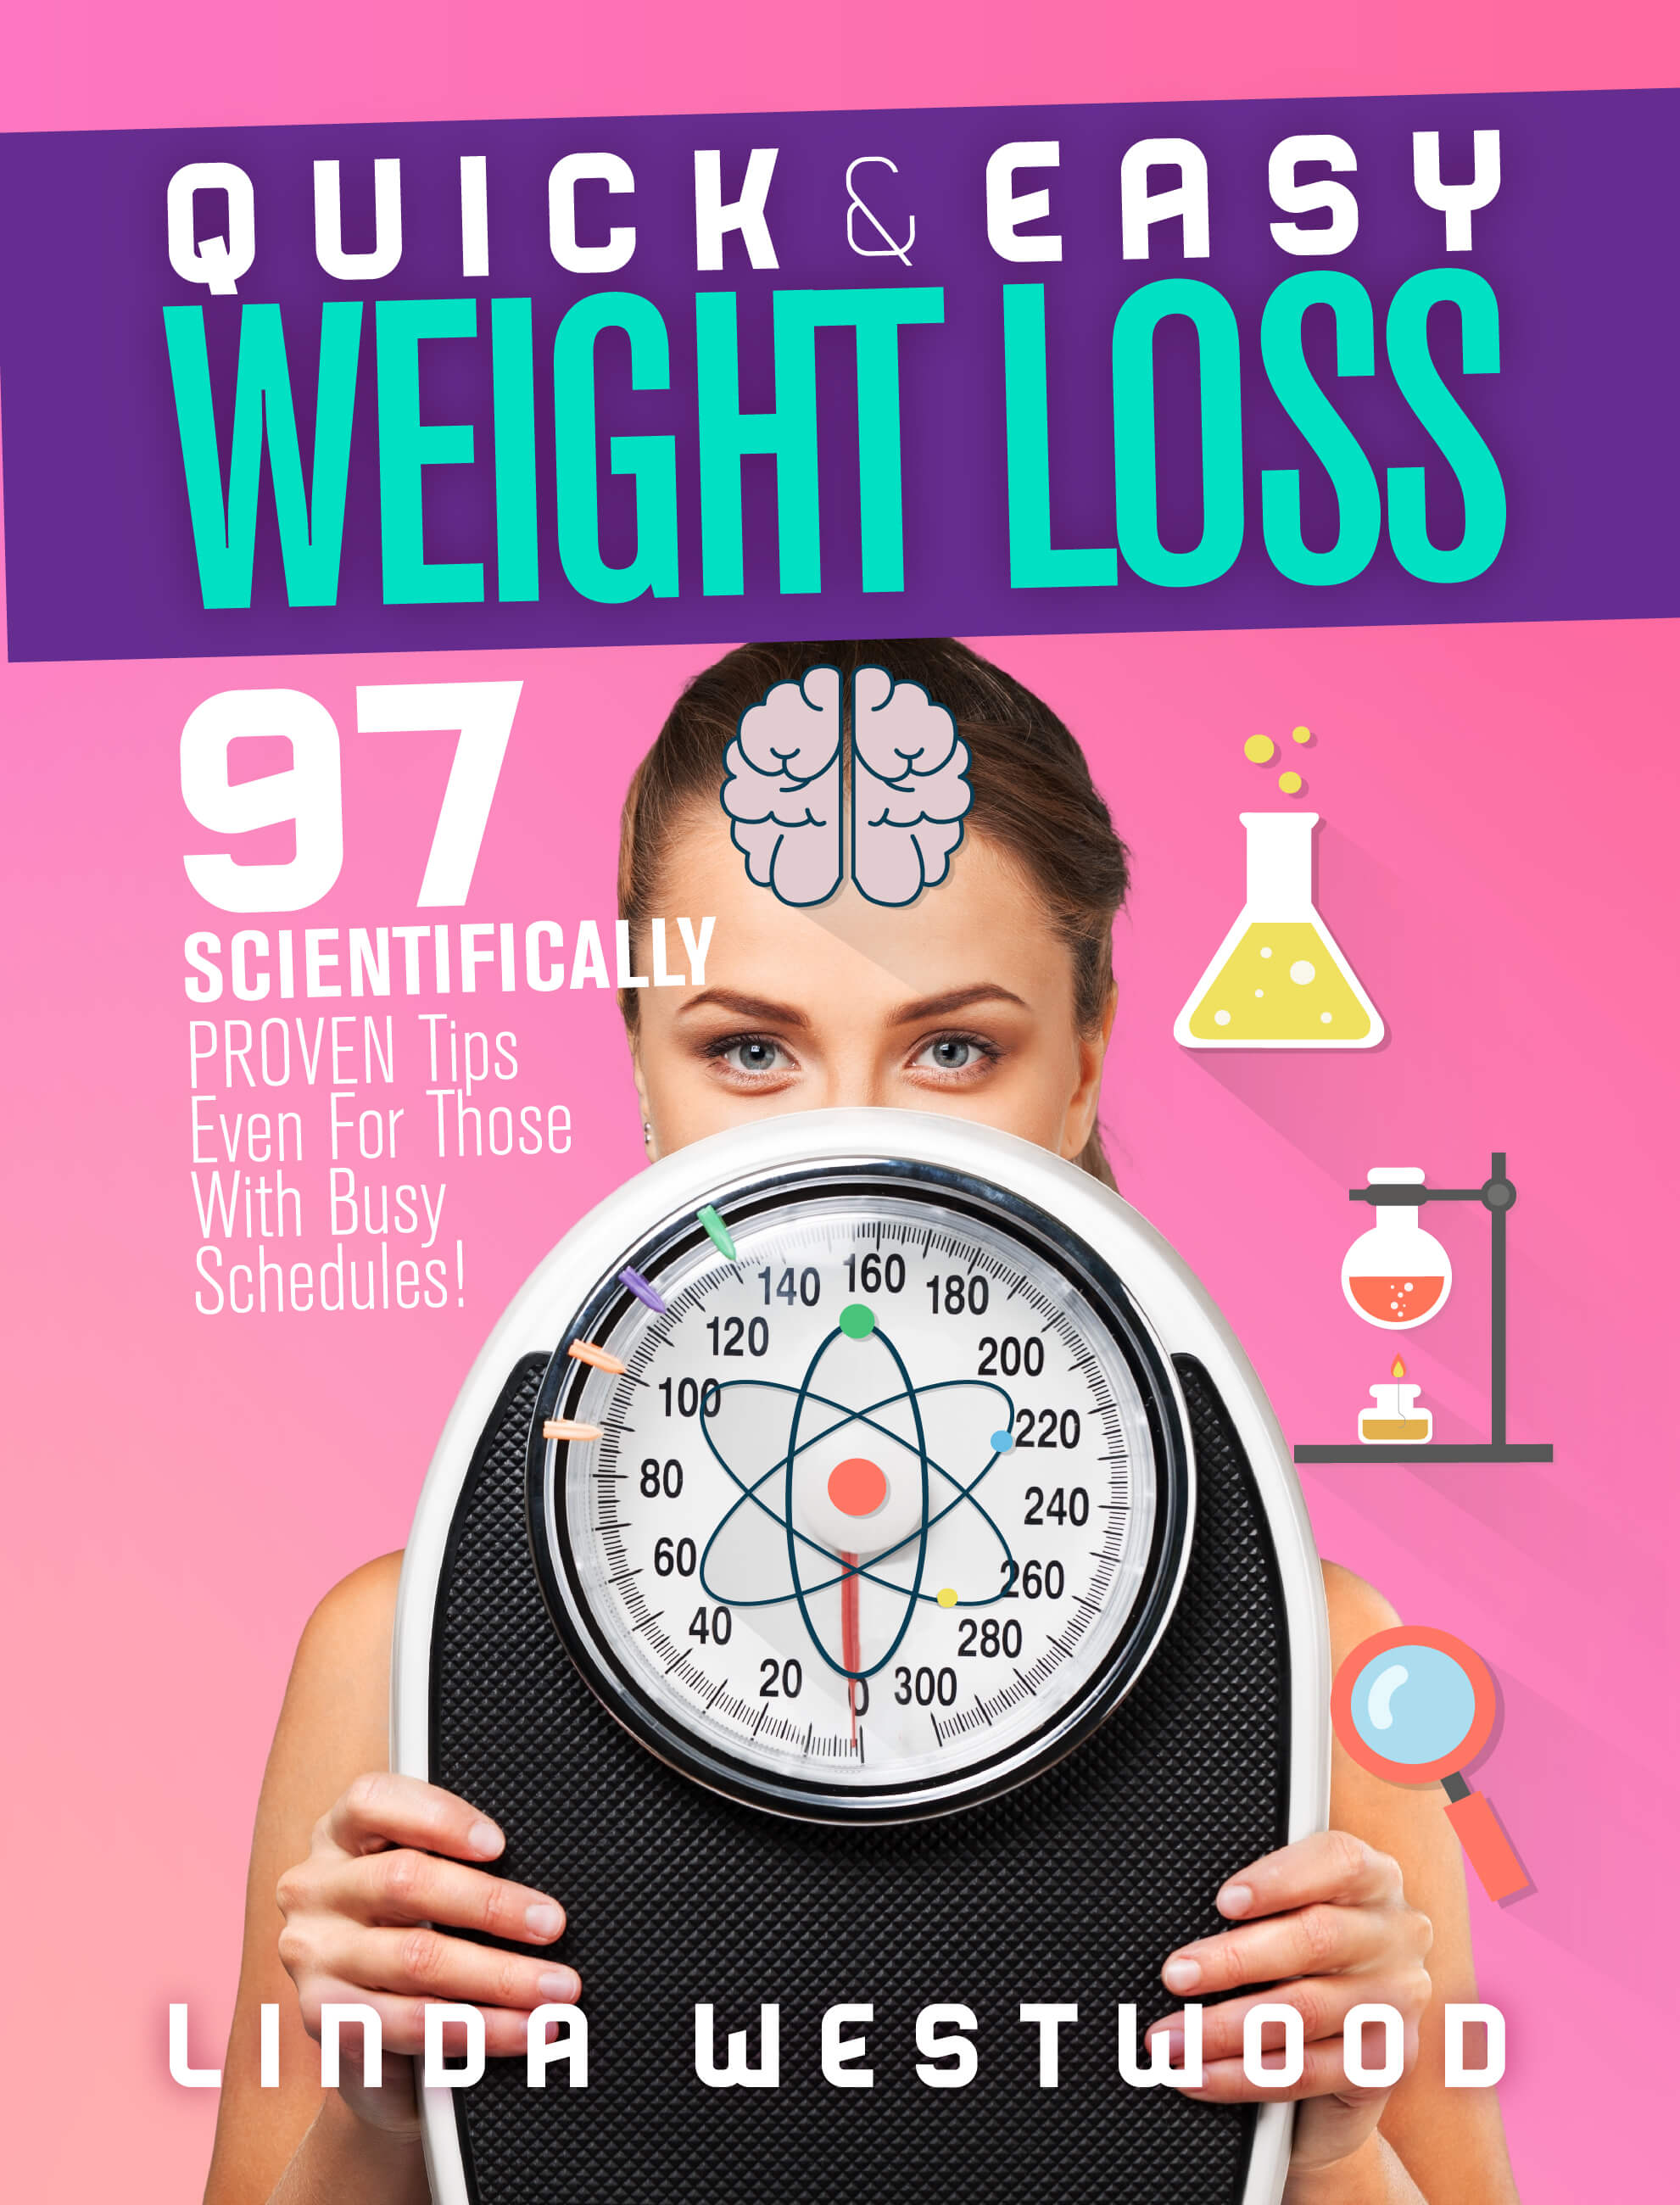 FREE: Quick & Easy Weight Loss: 97 Scientifically PROVEN Tips Even For Those With Busy Schedules! by Linda Westwood